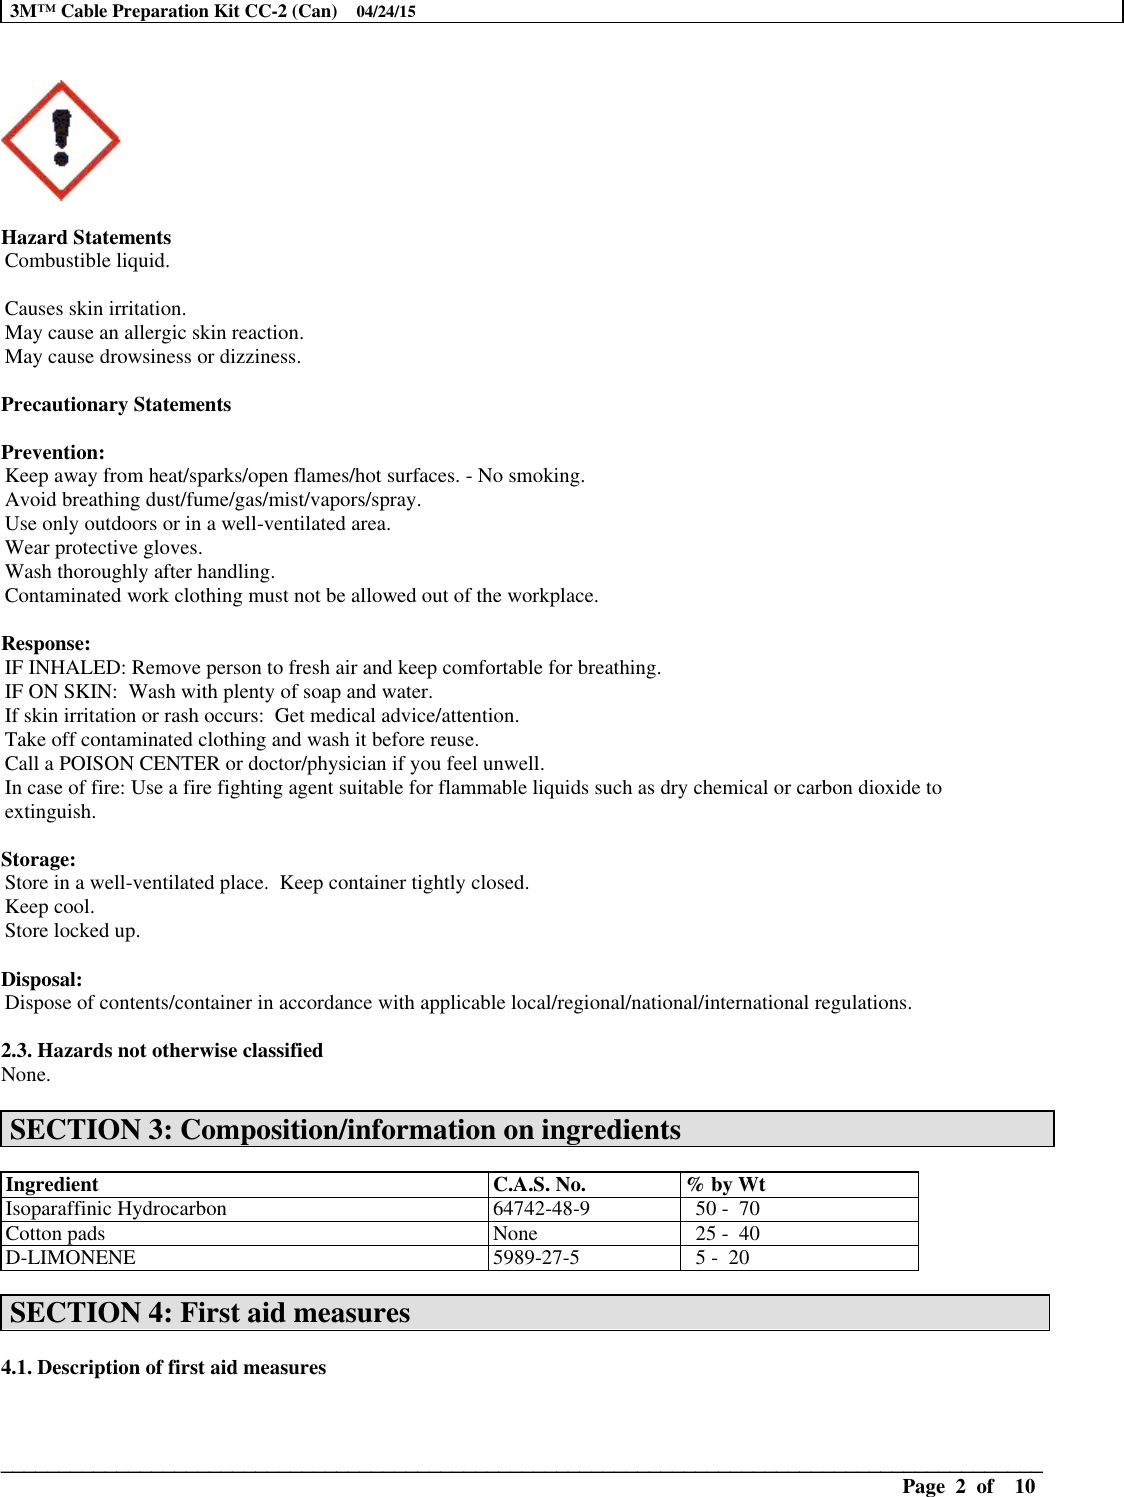 Page 4 of 12 - 127200-MSDS